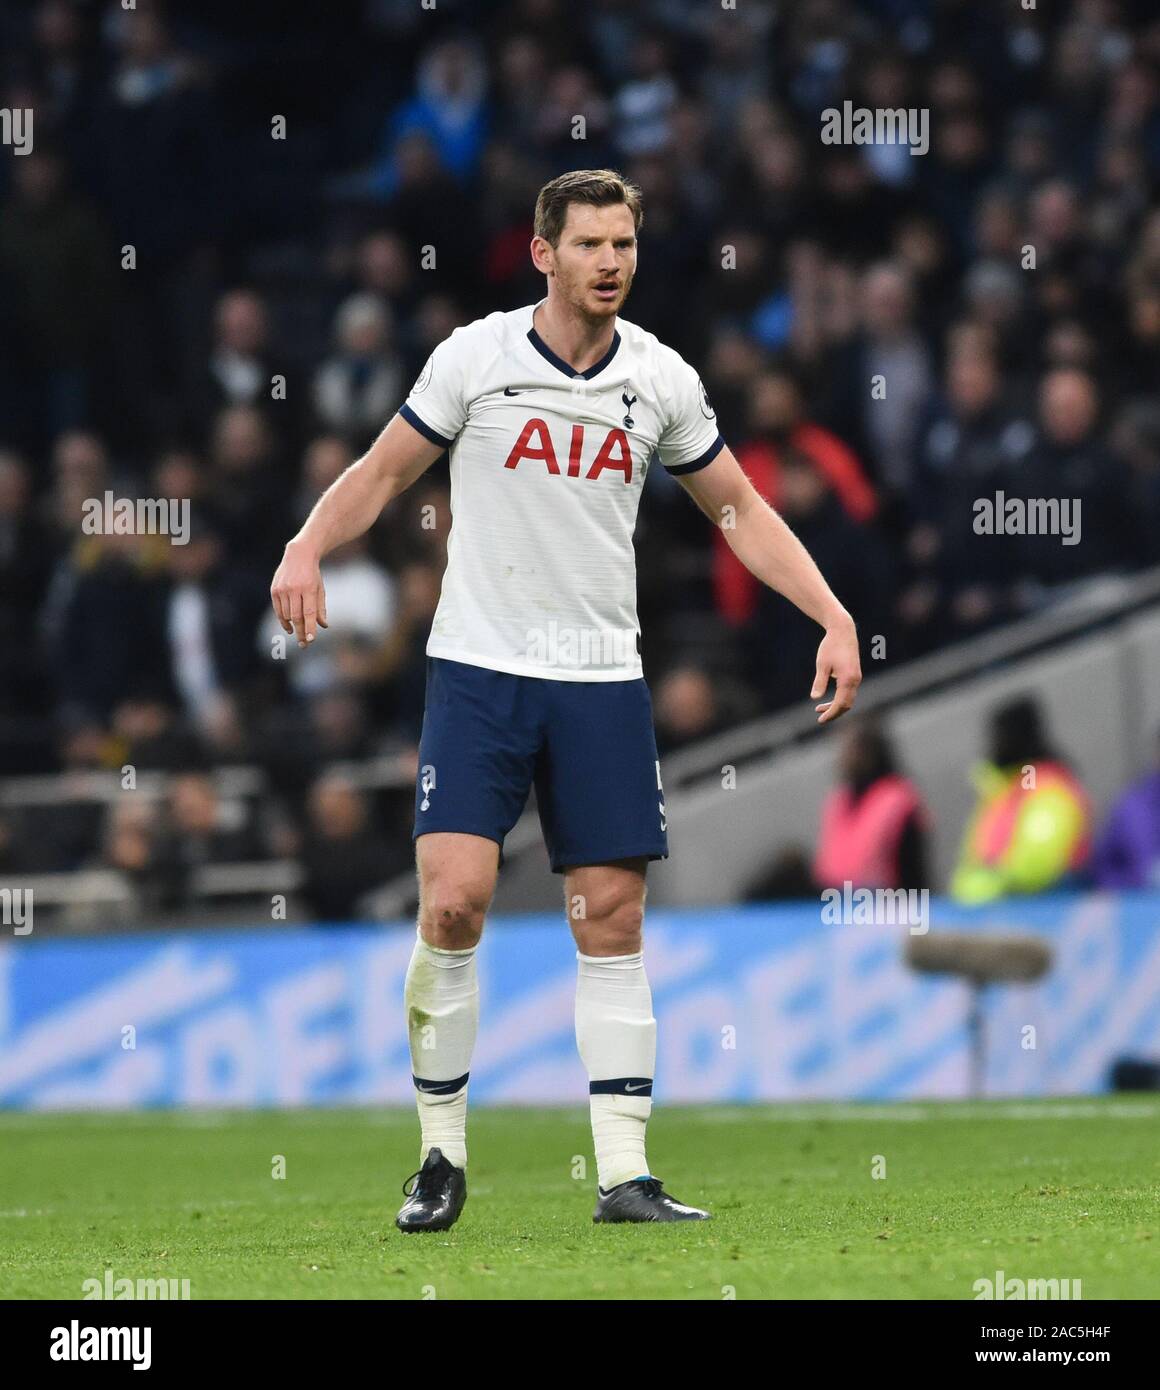 Jan Vertonghen of Spurs during the Premier League match between Tottenham Hotspur and AFC Bournemouth at the Tottenham Hotspur Stadium London, UK - 30th November 2019 Photo Simon Dack / Telephoto Images.  Editorial use only. No merchandising. For Football images FA and Premier League restrictions apply inc. no internet/mobile usage without FAPL license - for details contact Football Dataco Stock Photo